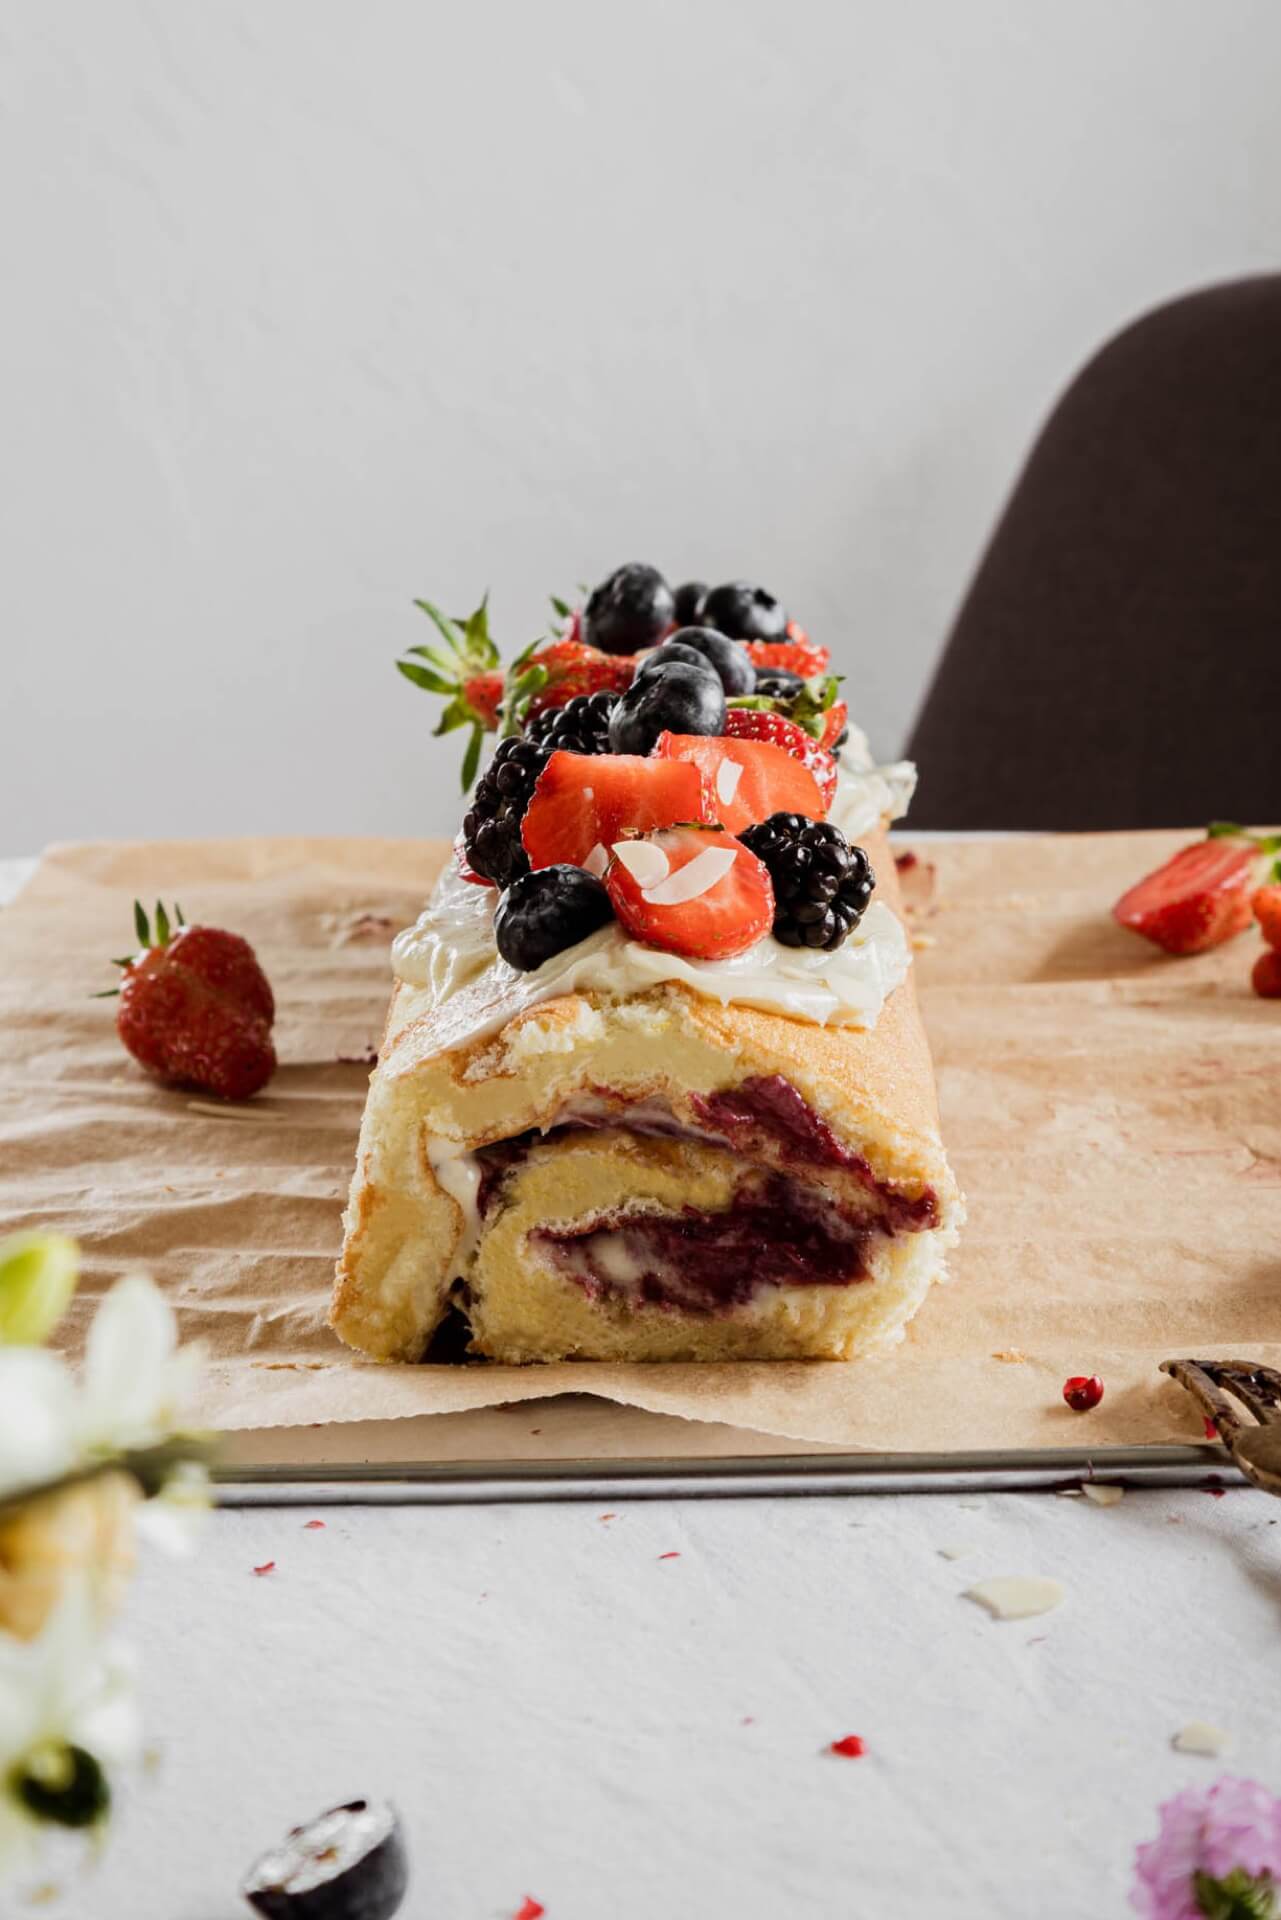 Recipe for Swiss roll with berry jam and chocolate marscapone cream